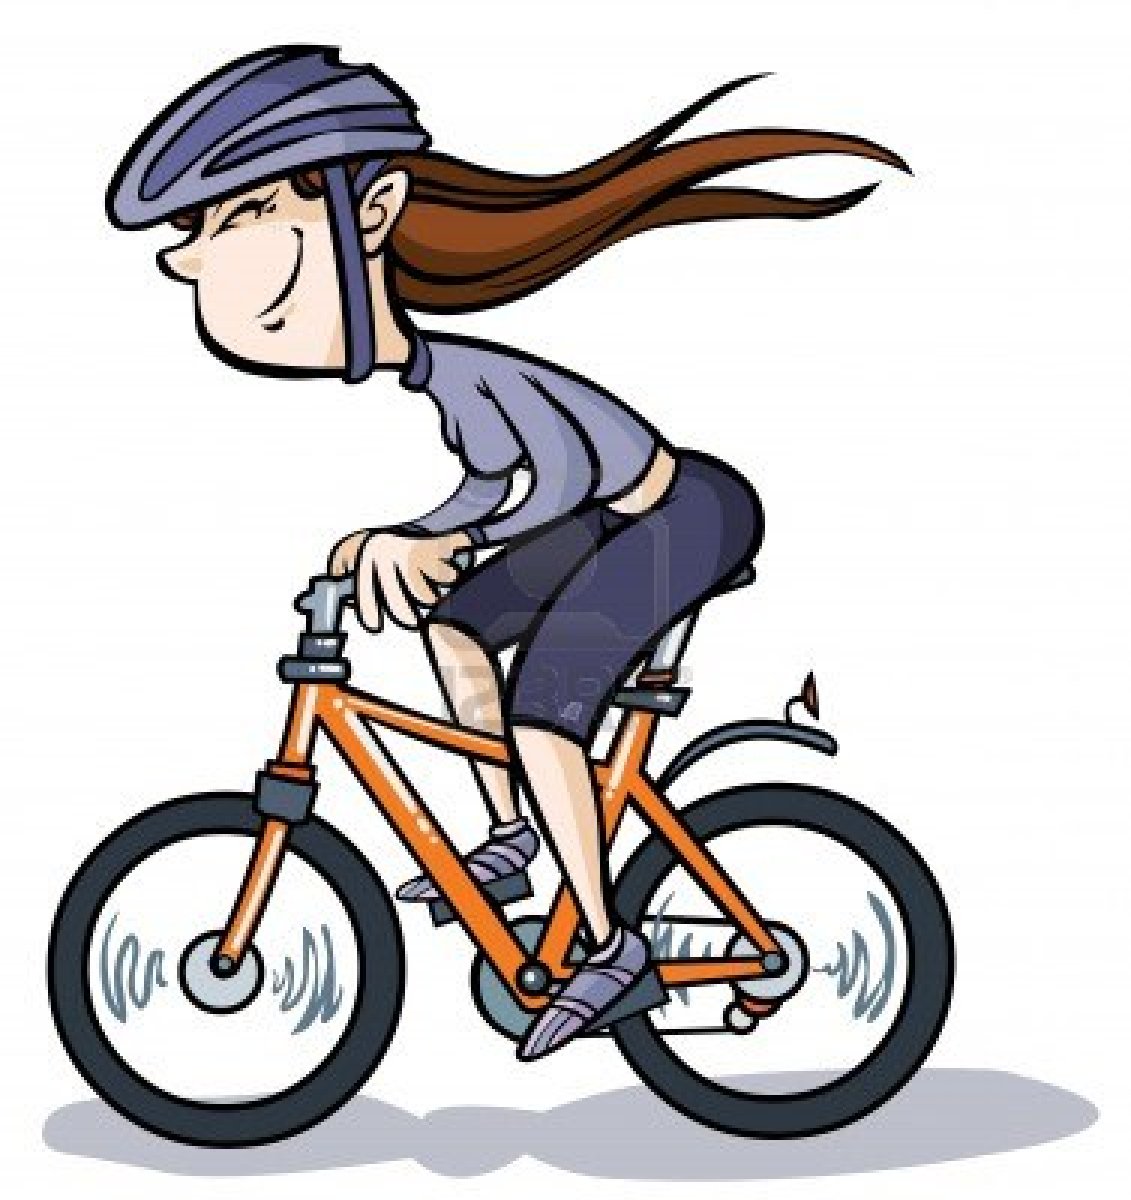 Cycling Cartoon Images   Wallpaper Hd Wide